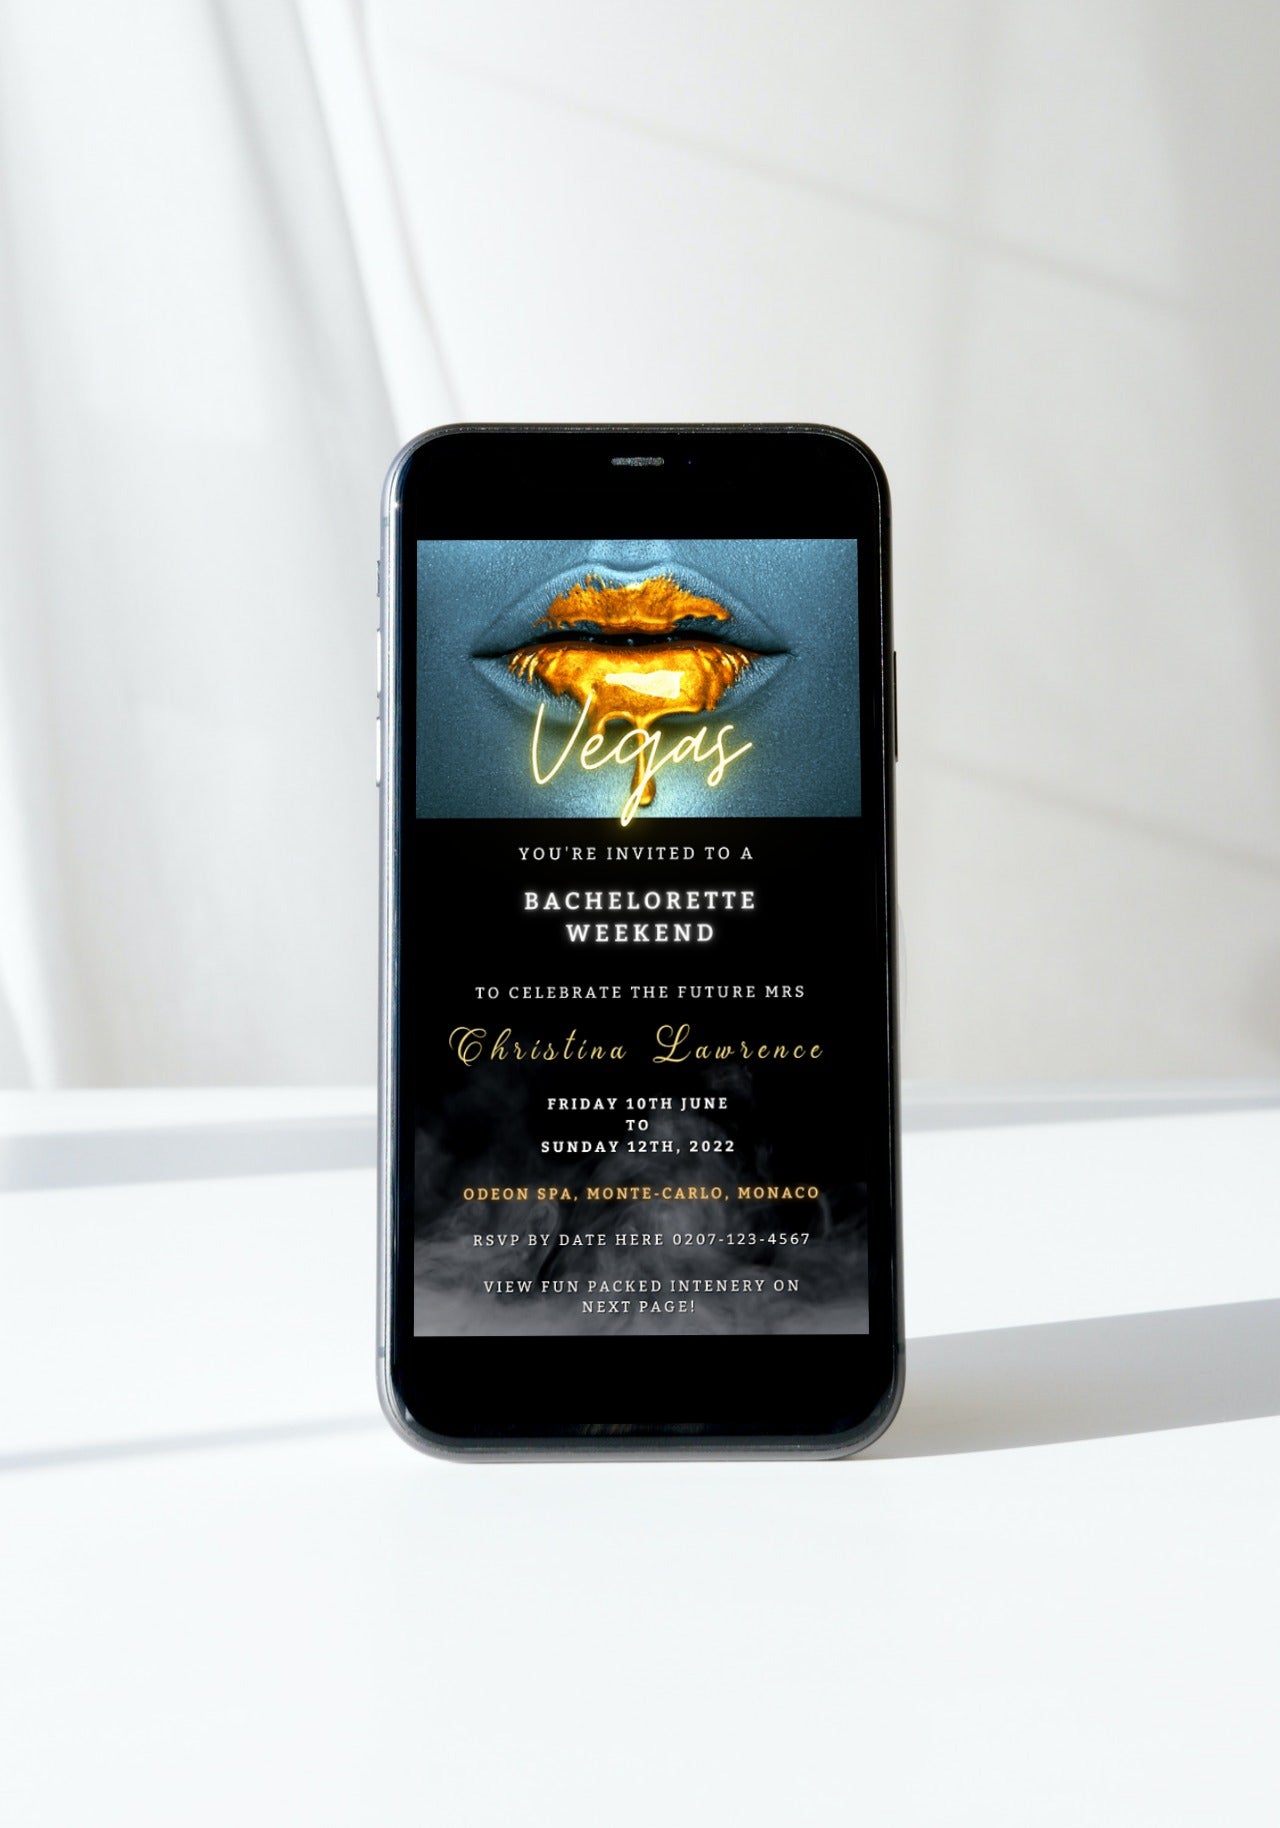 Smartphone displaying customizable digital invitation with gold lips design for a bachelorette event. Editable in Canva, shareable via text, email, and messenger apps.